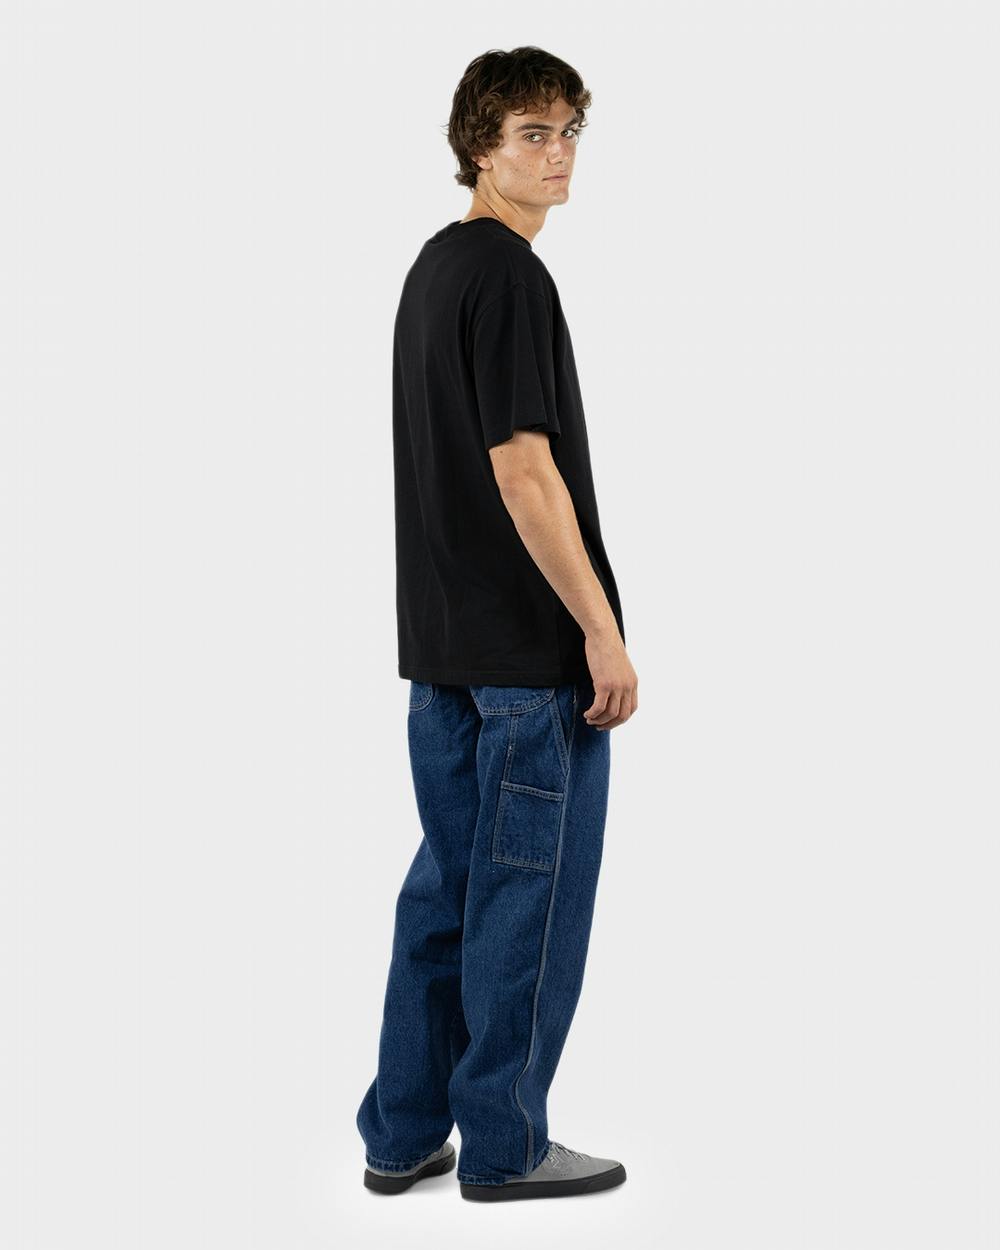 Relaxed Fit Heavyweight Carpenter Jeans